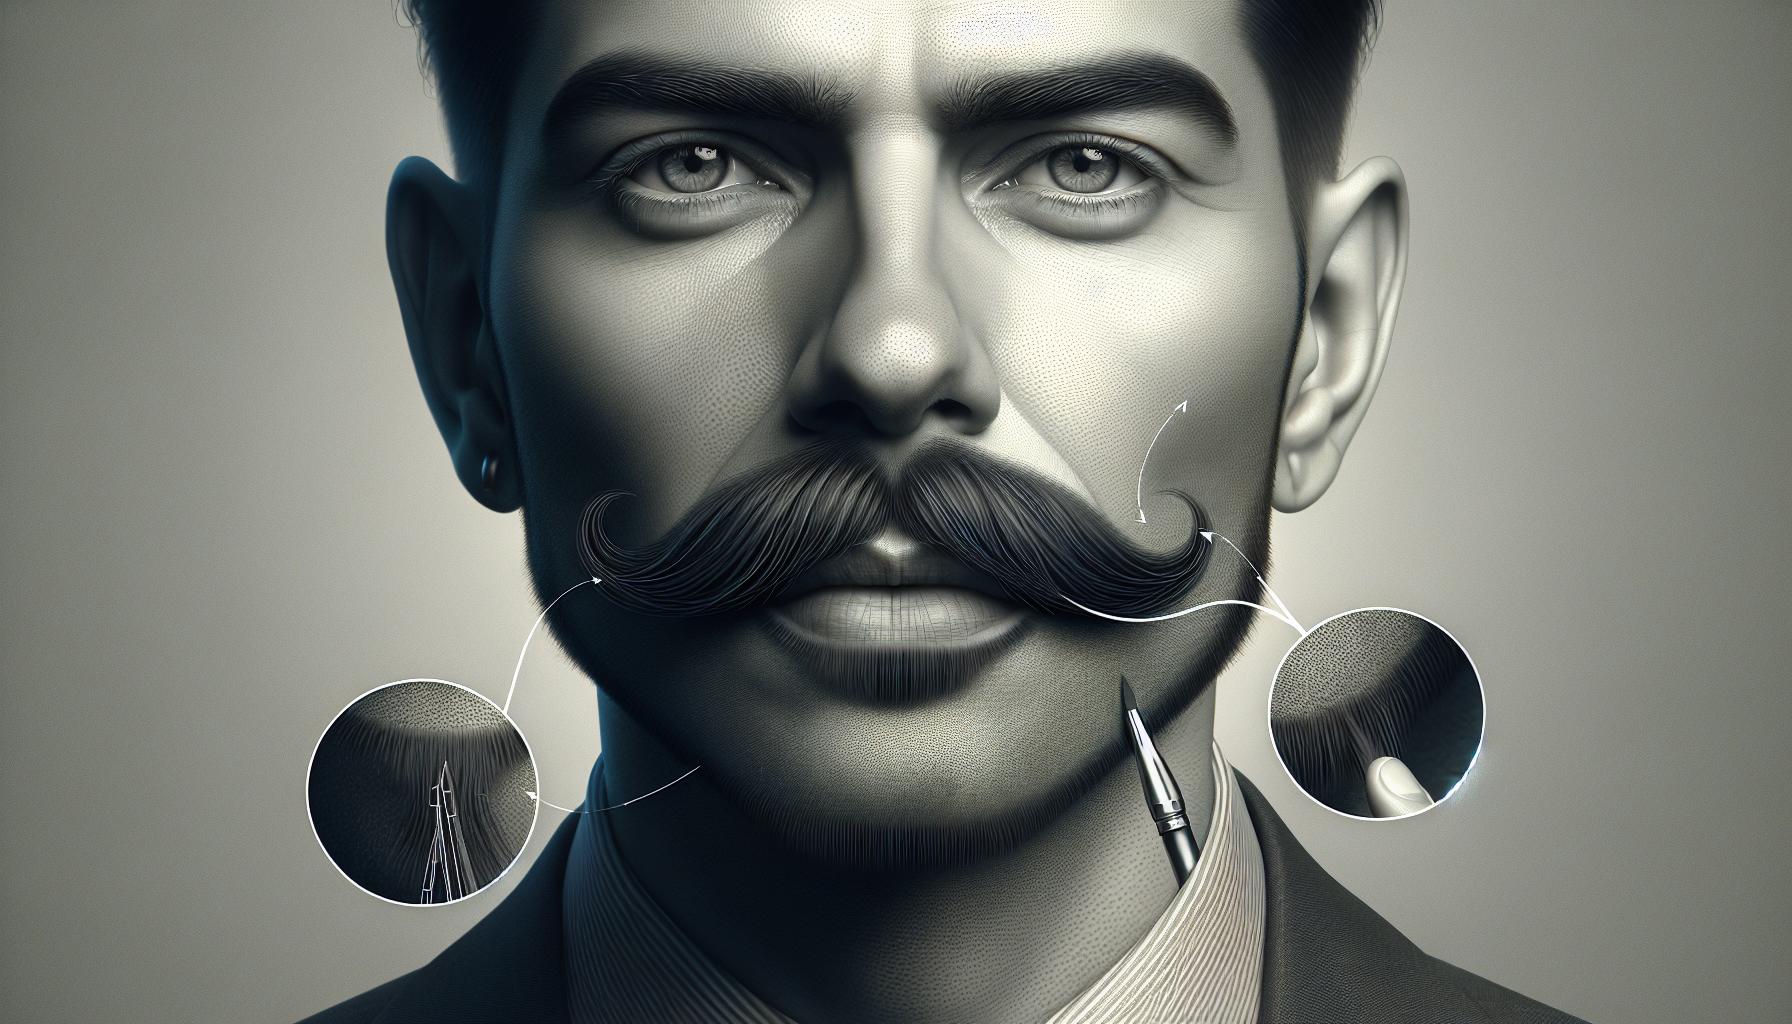 Lampshade Mustache Guide: Styling Pros and Cons